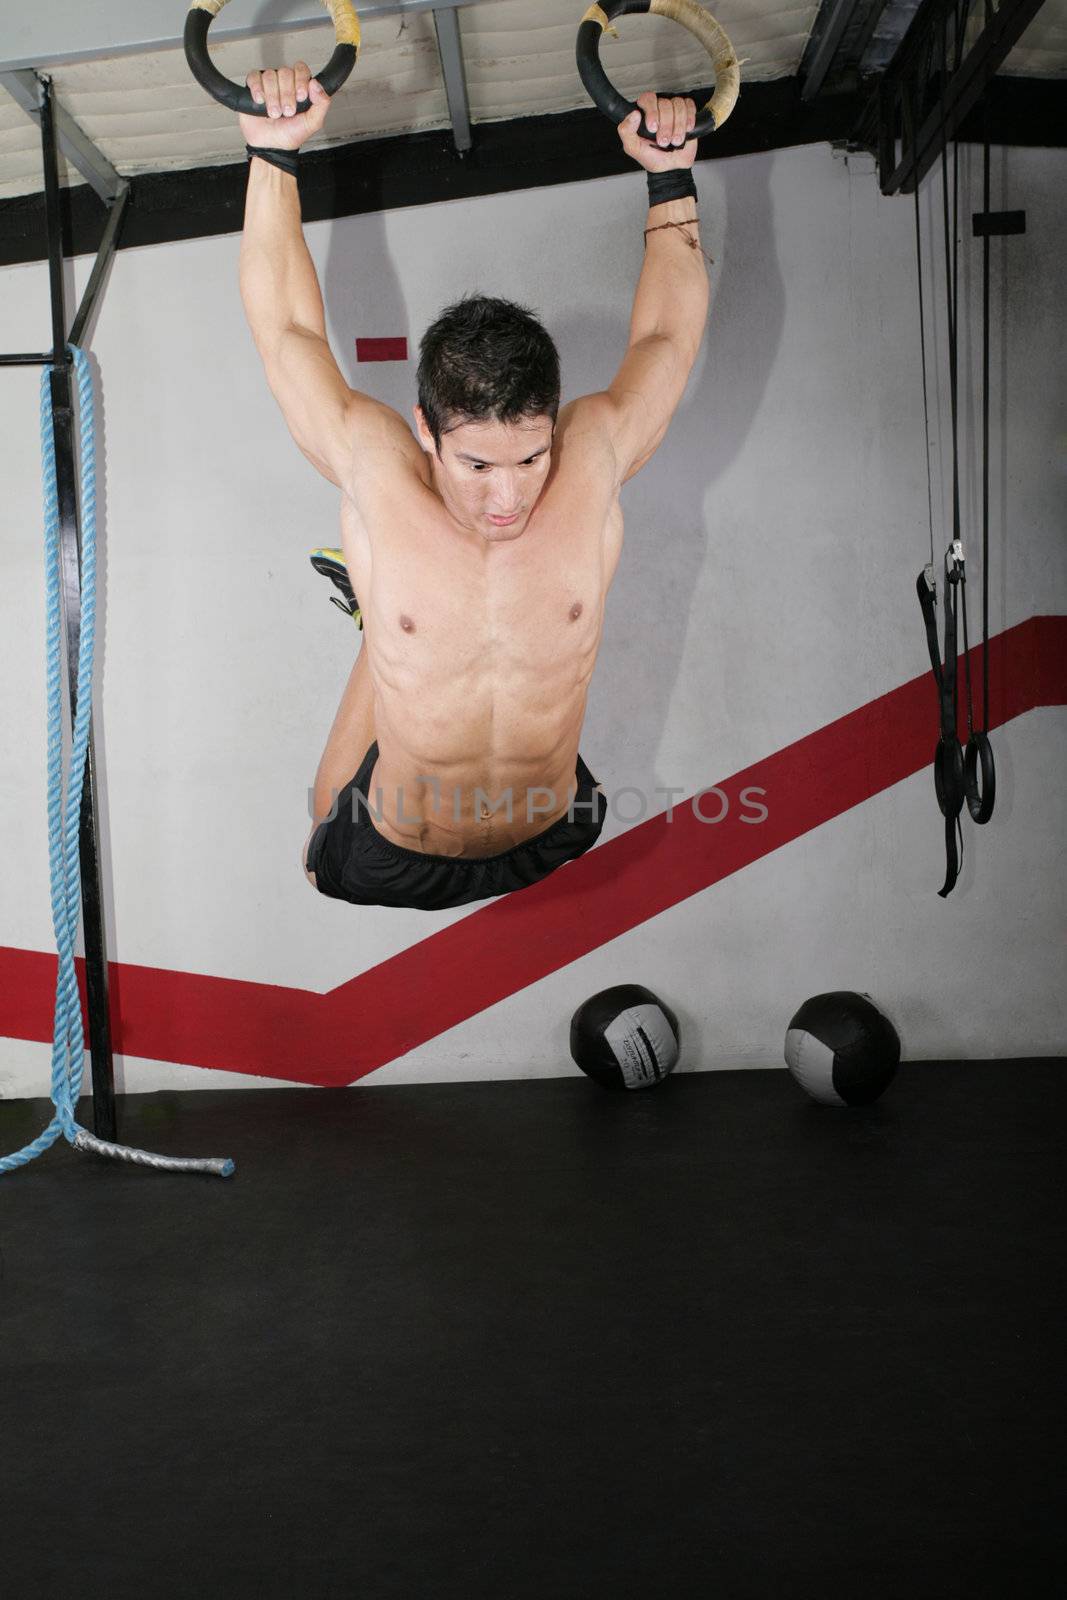 Ring dip crossfit exercise over a dark background.